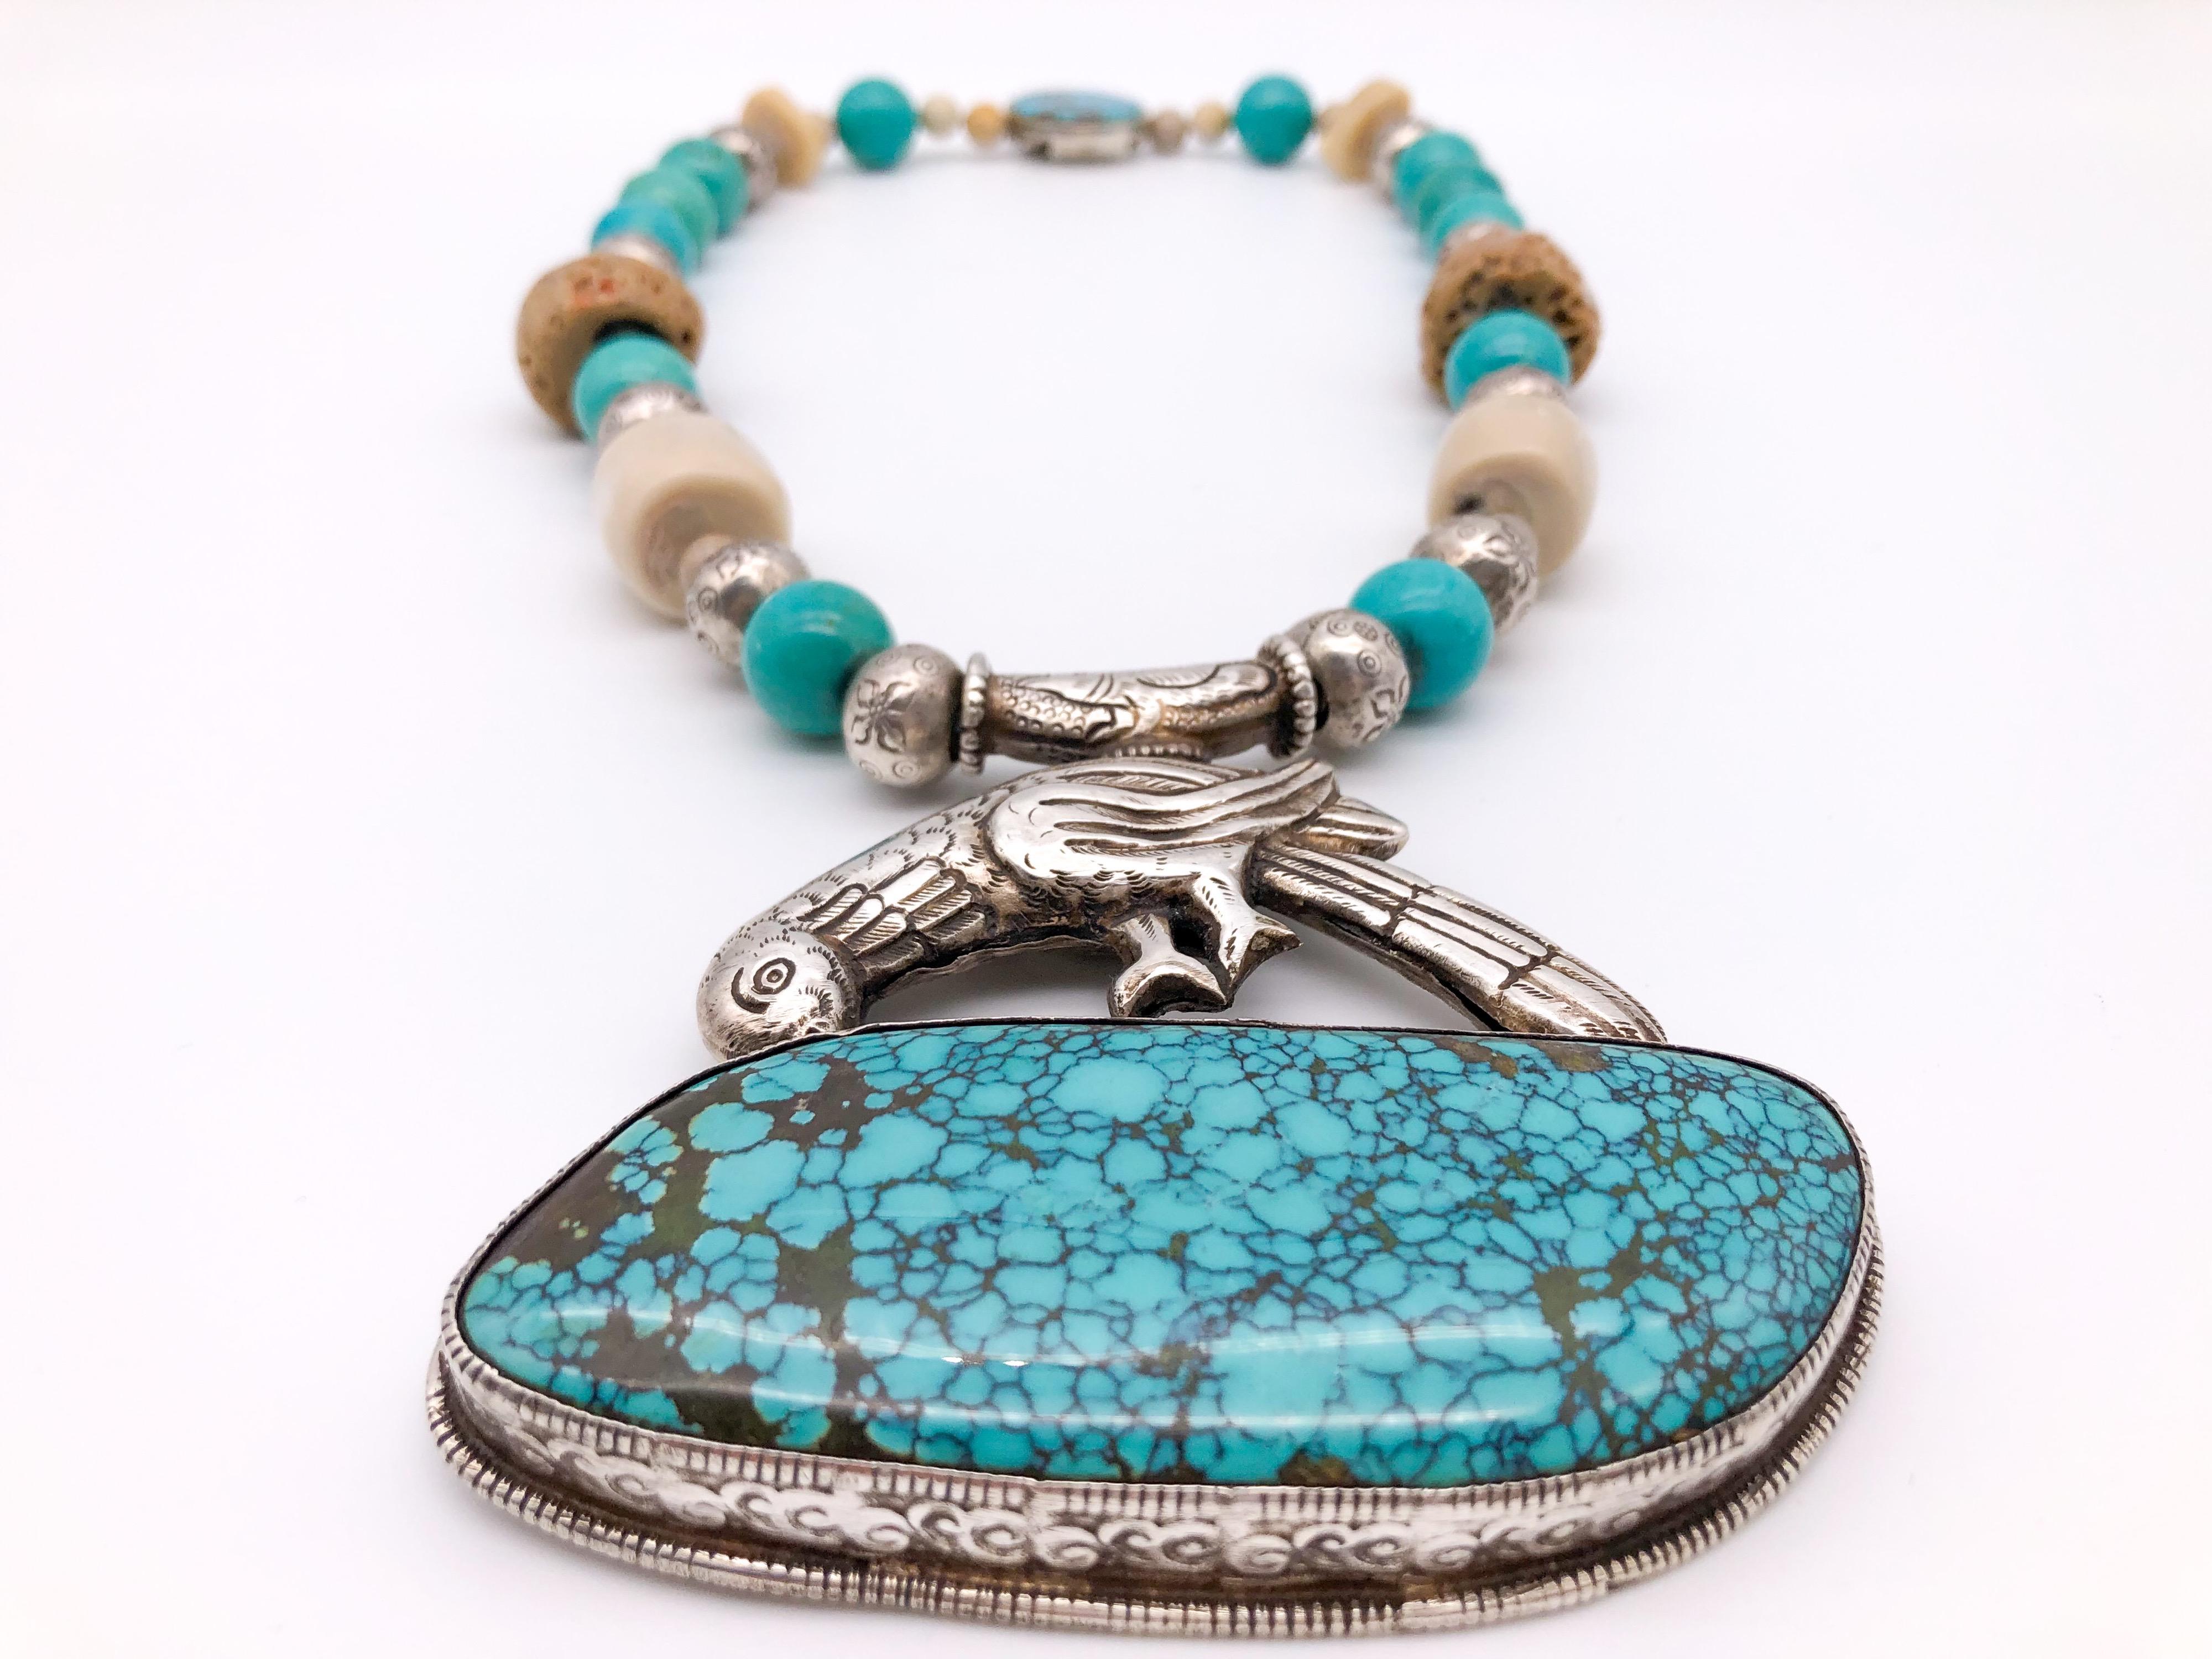 Contemporary A.Jeschel Turquoise and Ethnic beads necklace with Tibetan Silver Bird Pendant   For Sale